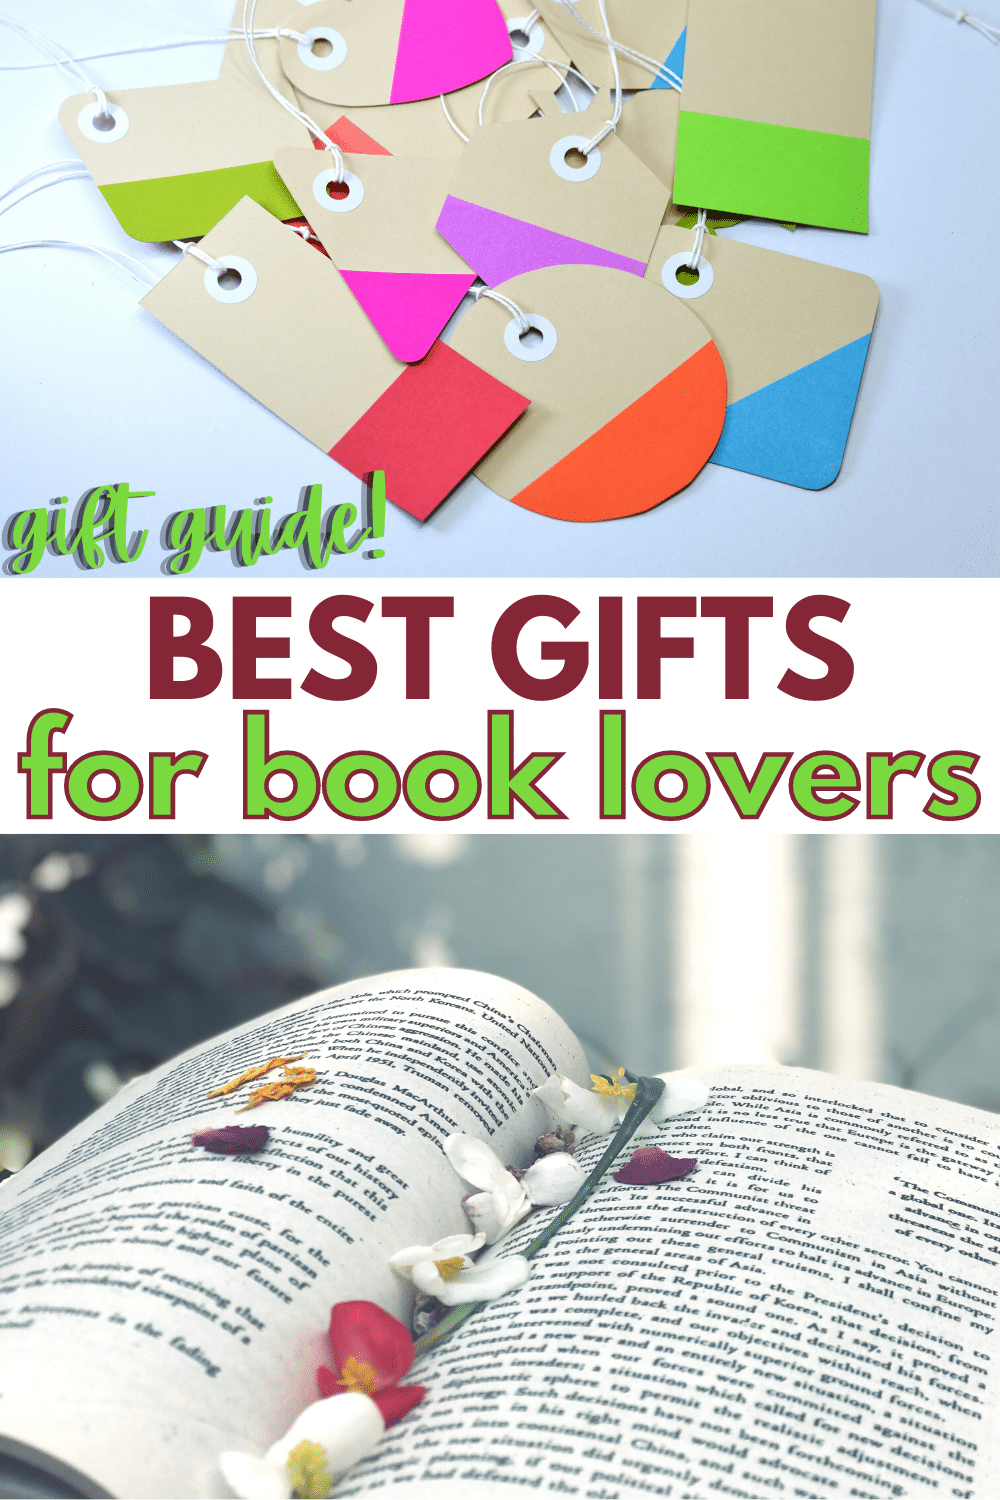 There are lots of great gifts for book lovers besides books. There are some great ideas in this best gifts for book lovers guide. #giftguide #giftideas #booklovers via @wondermomwannab